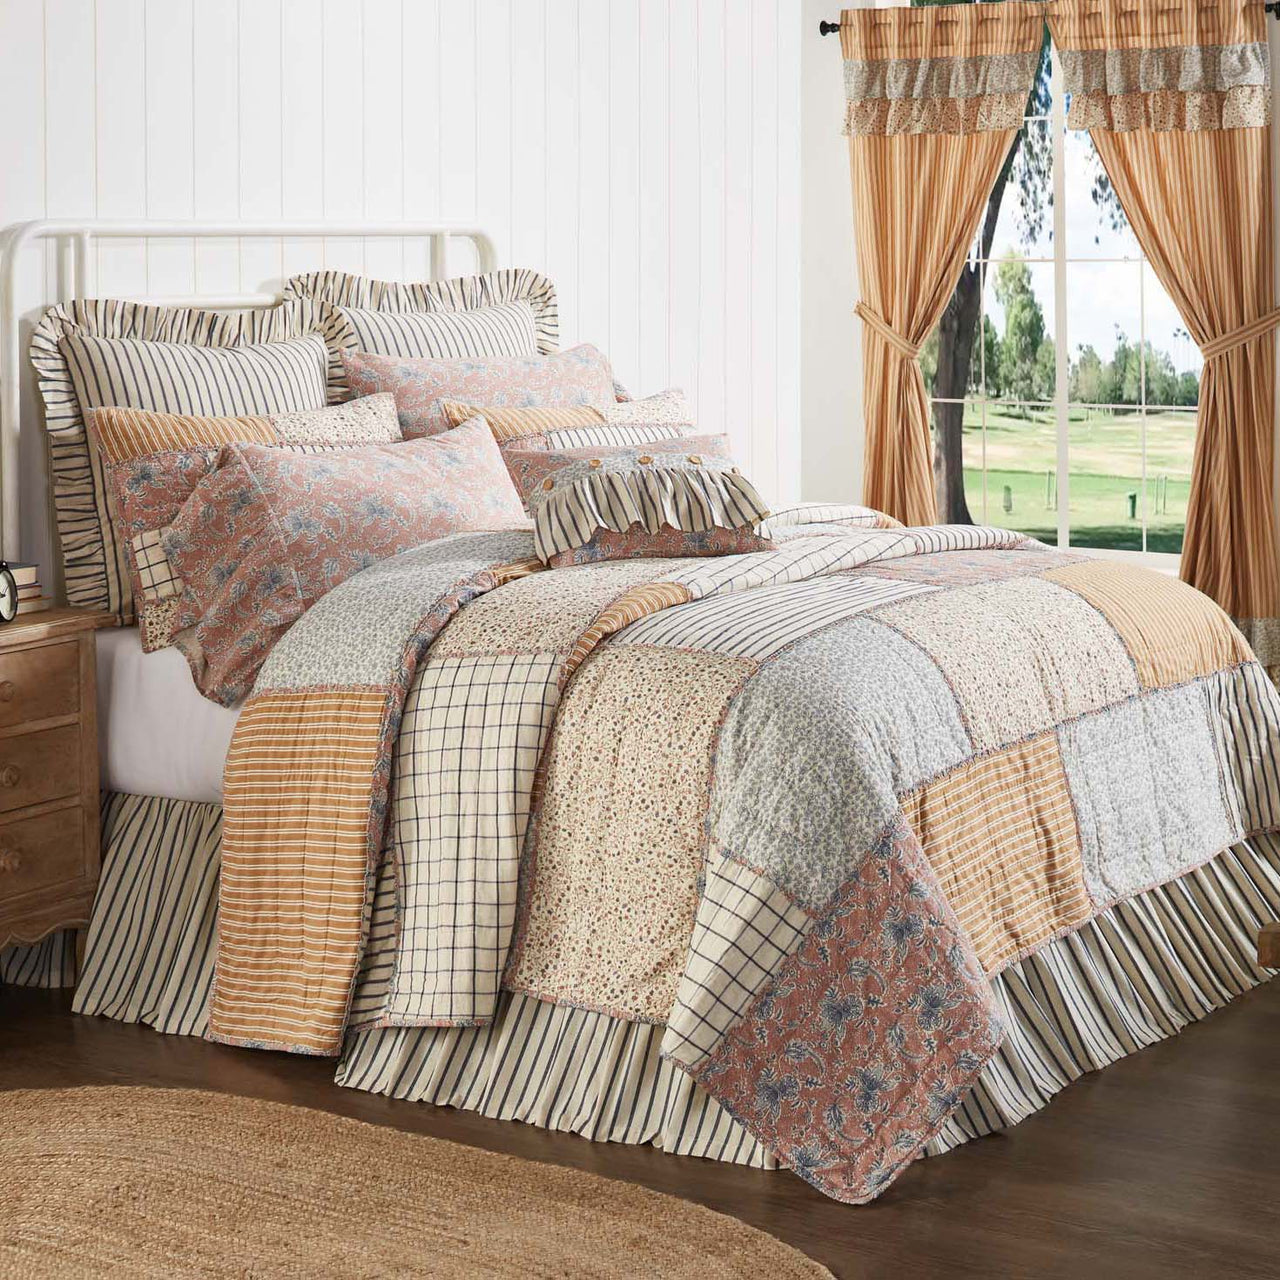 Kaila Luxury King Quilt 120Wx105L VHC Brands